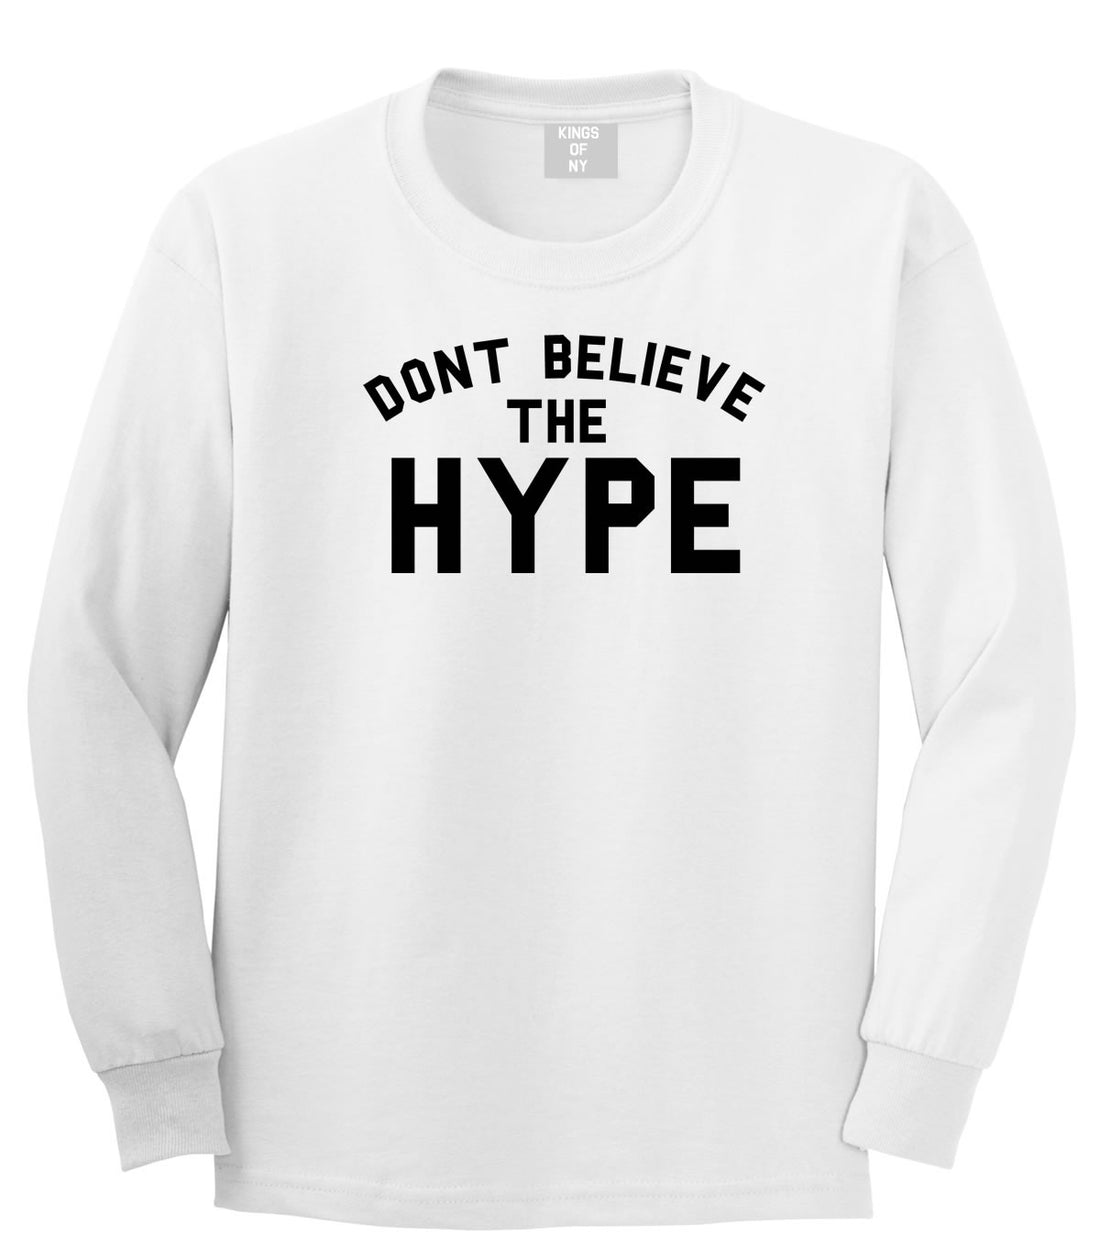 Don't Believe The Hype Long Sleeve T-Shirt in White By Kings Of NY